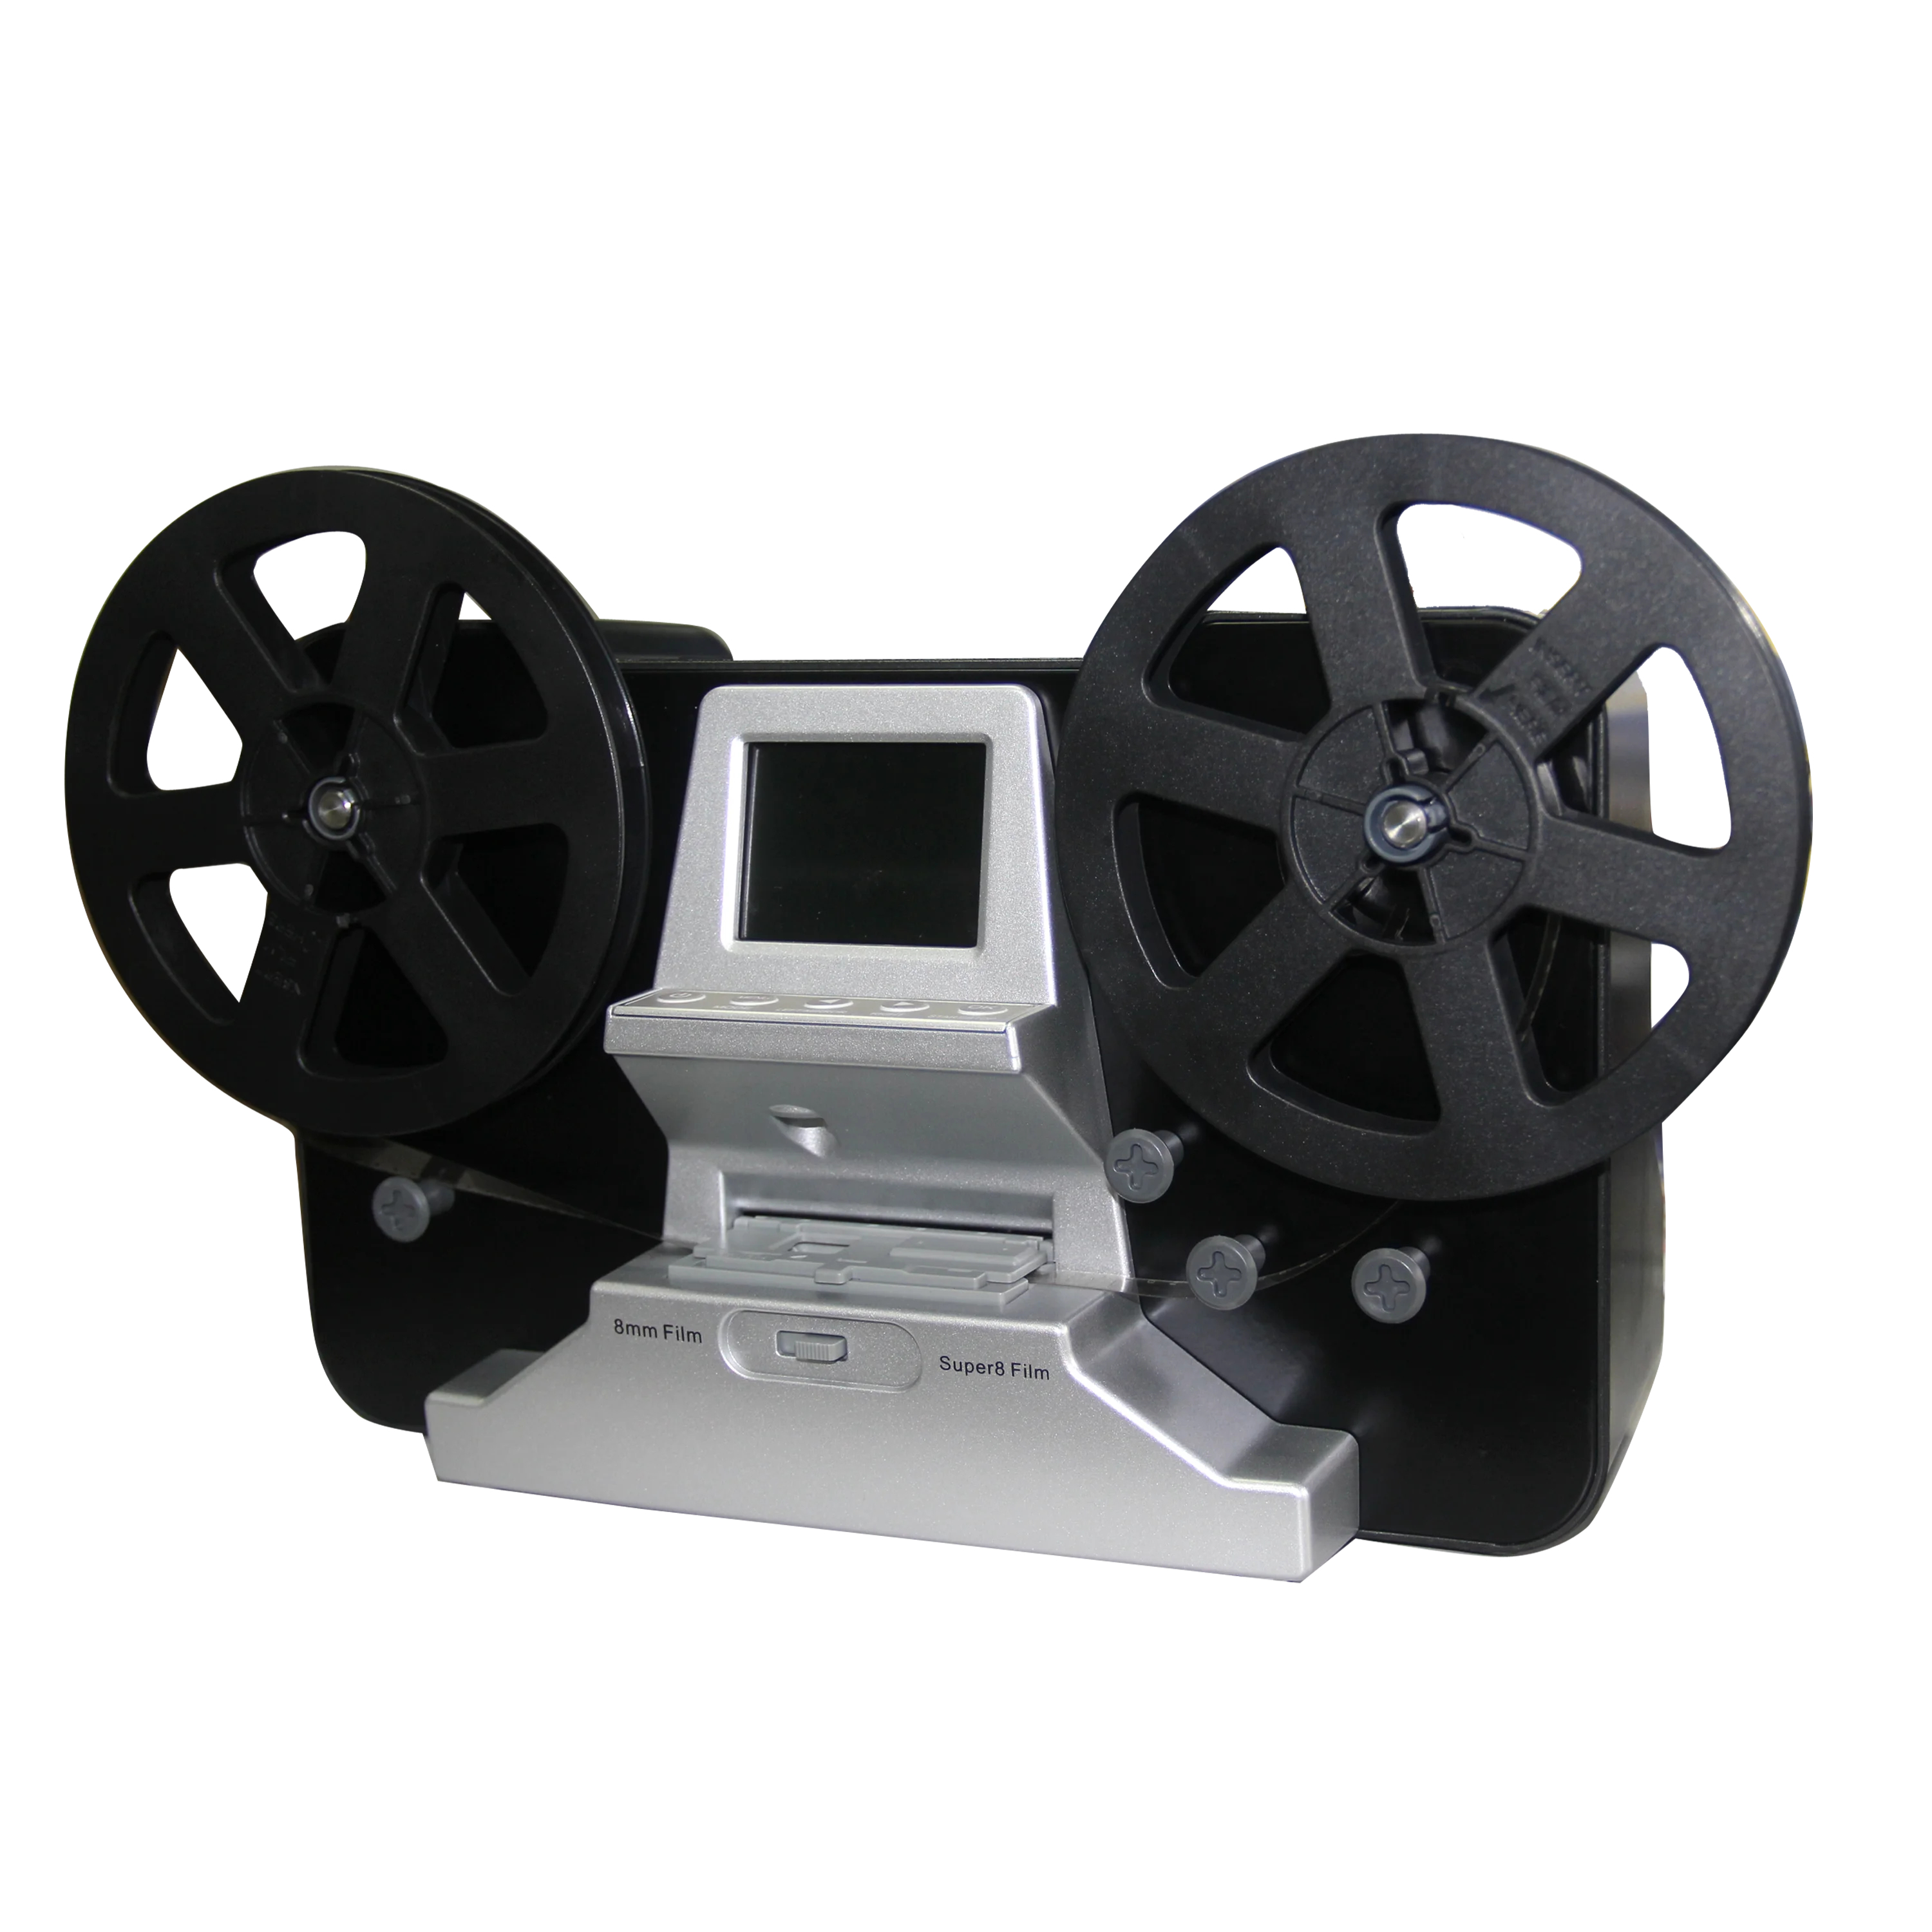 8mm and Super 8 Film Reel Converter Scanner,Convert Film To Digital  Video,Comes with 2.4 LCD